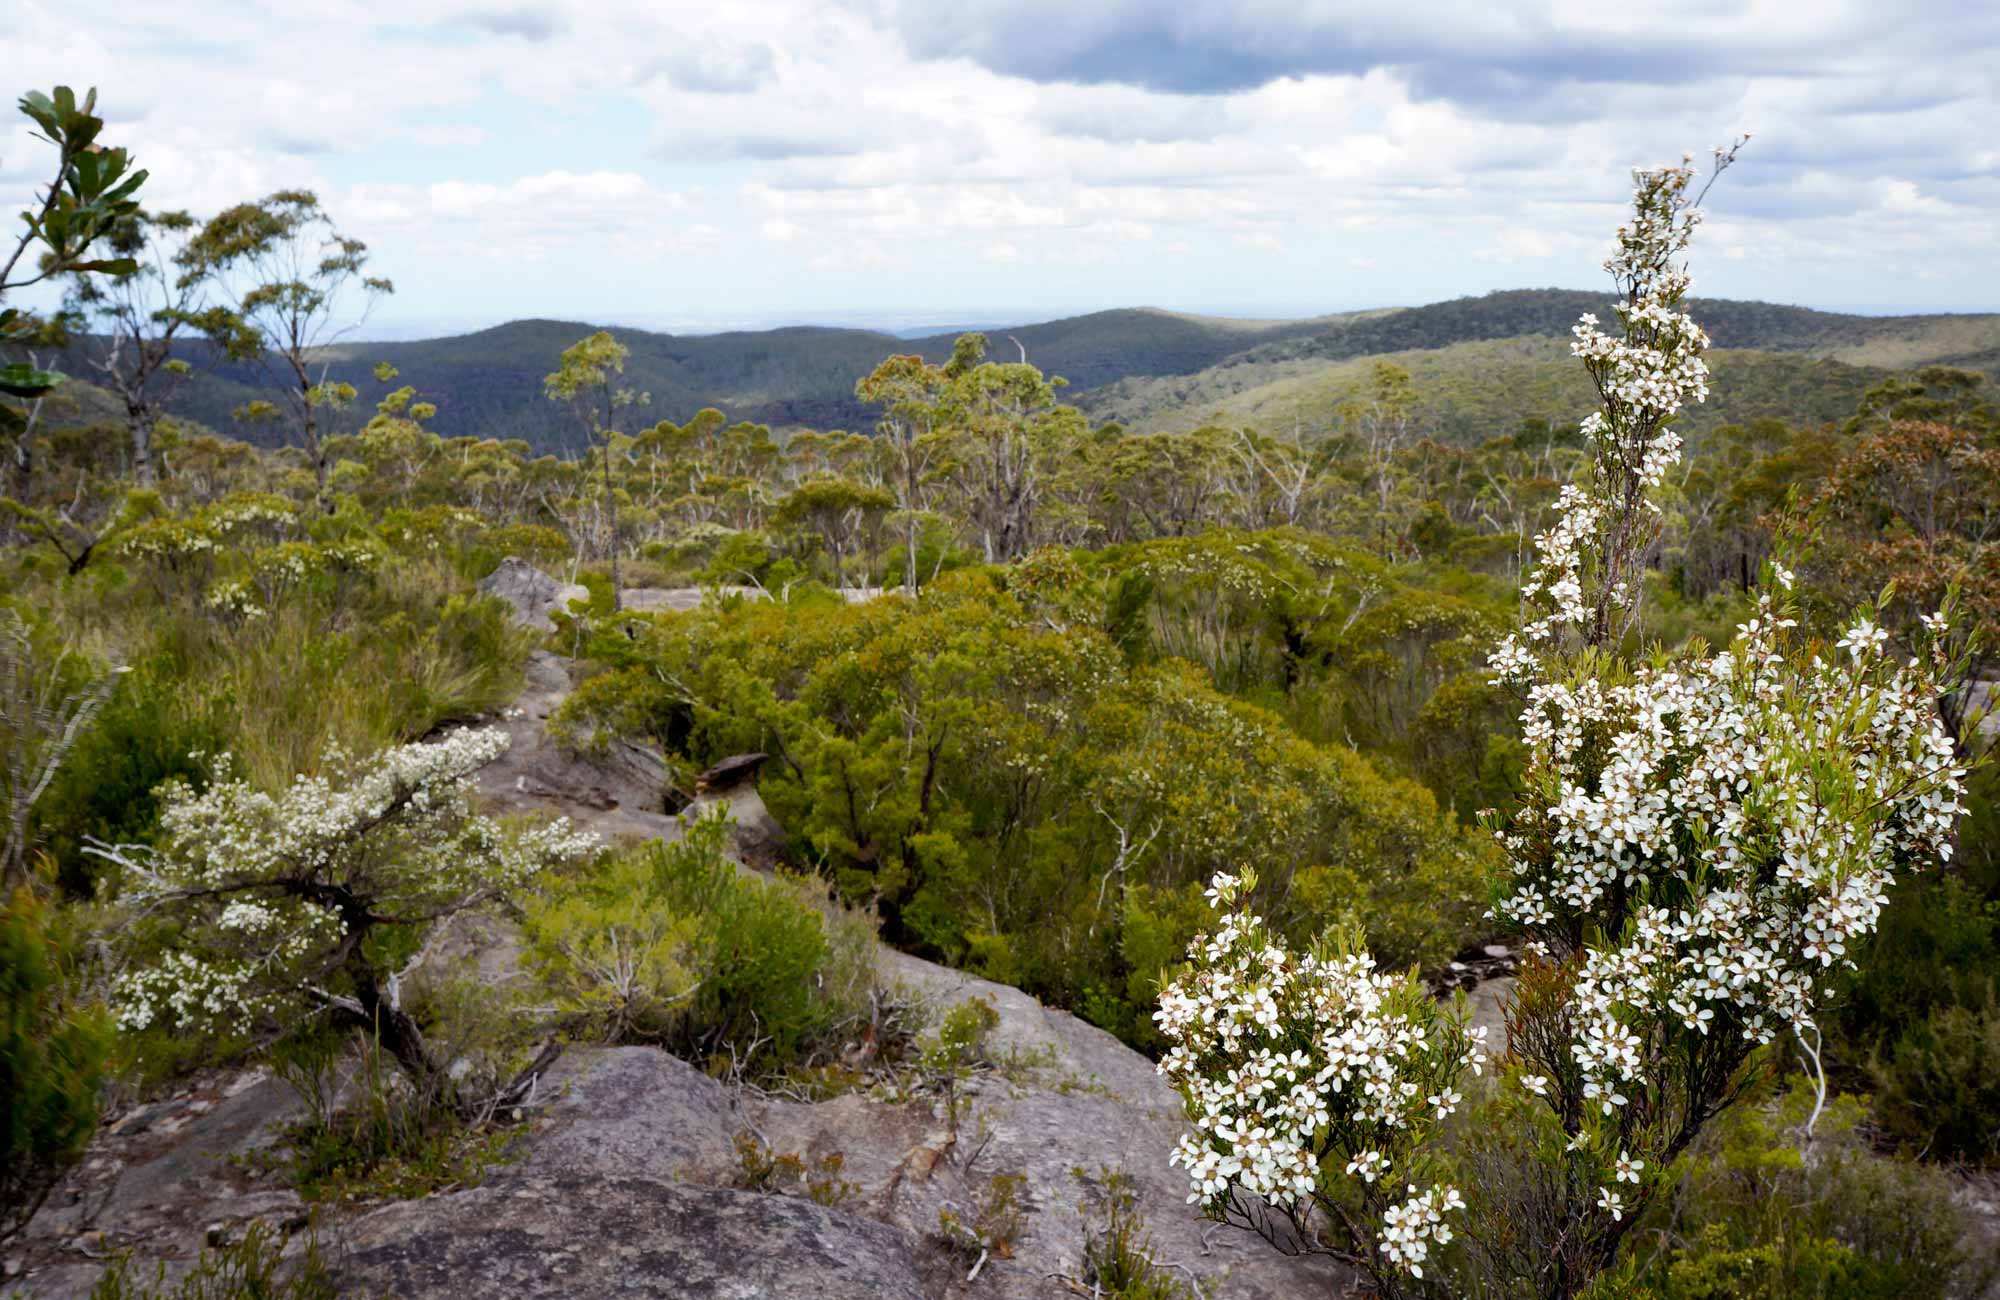 Murphy's Fire Trail - Wentworth Falls to Woodford, Blue Mountains National Park. Photo: Steve Alton/NSW Government